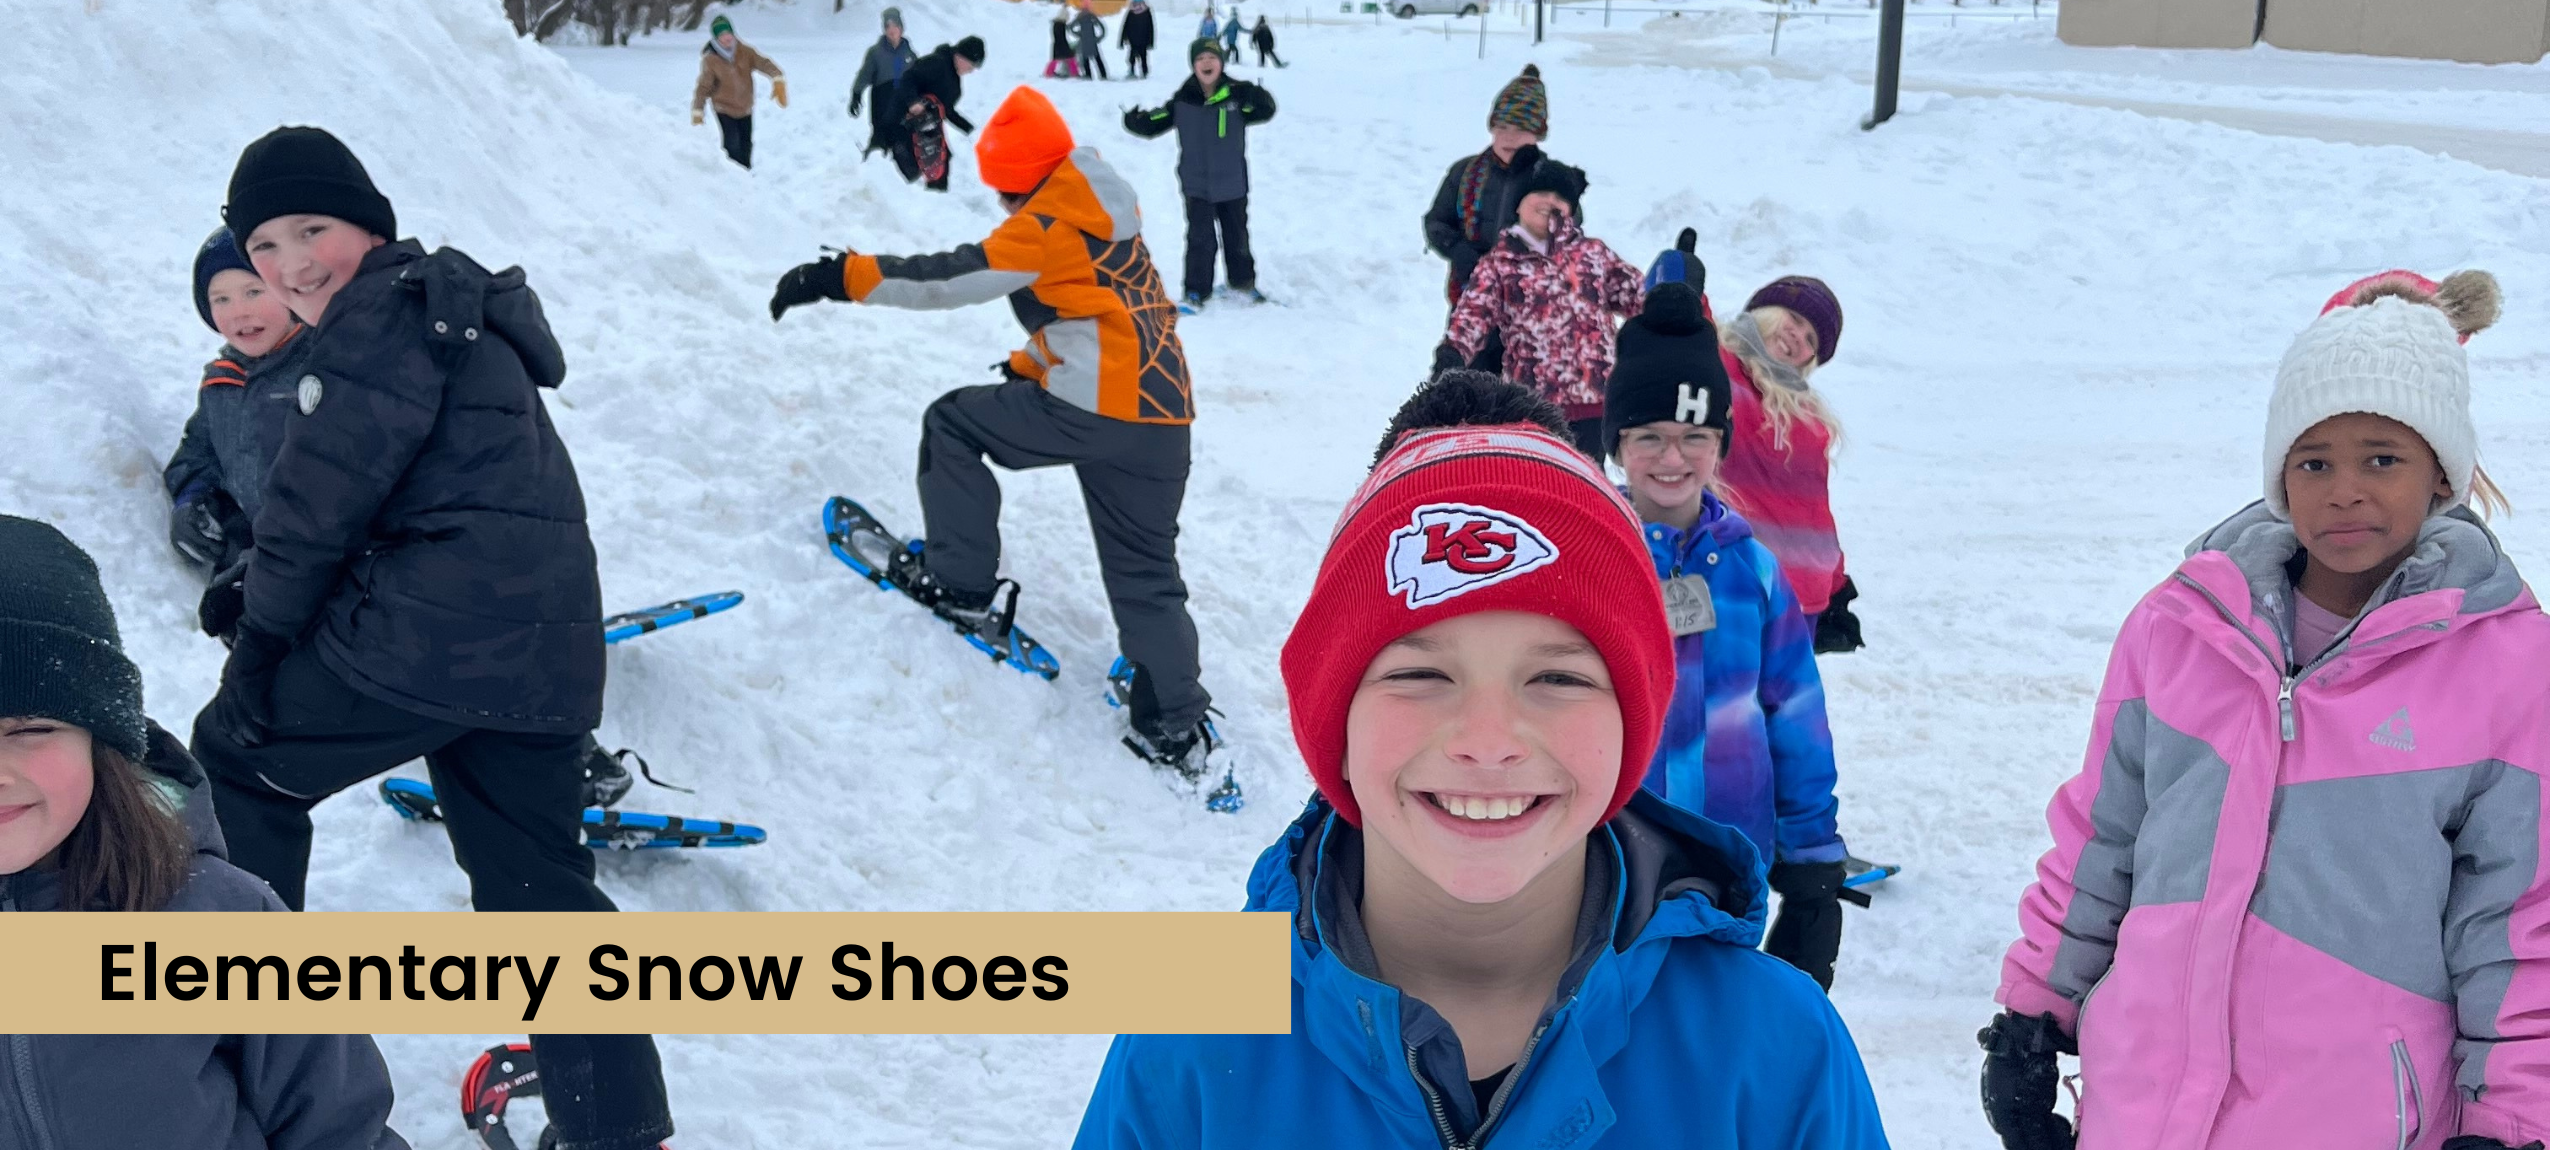 Elementary Snow Shoes